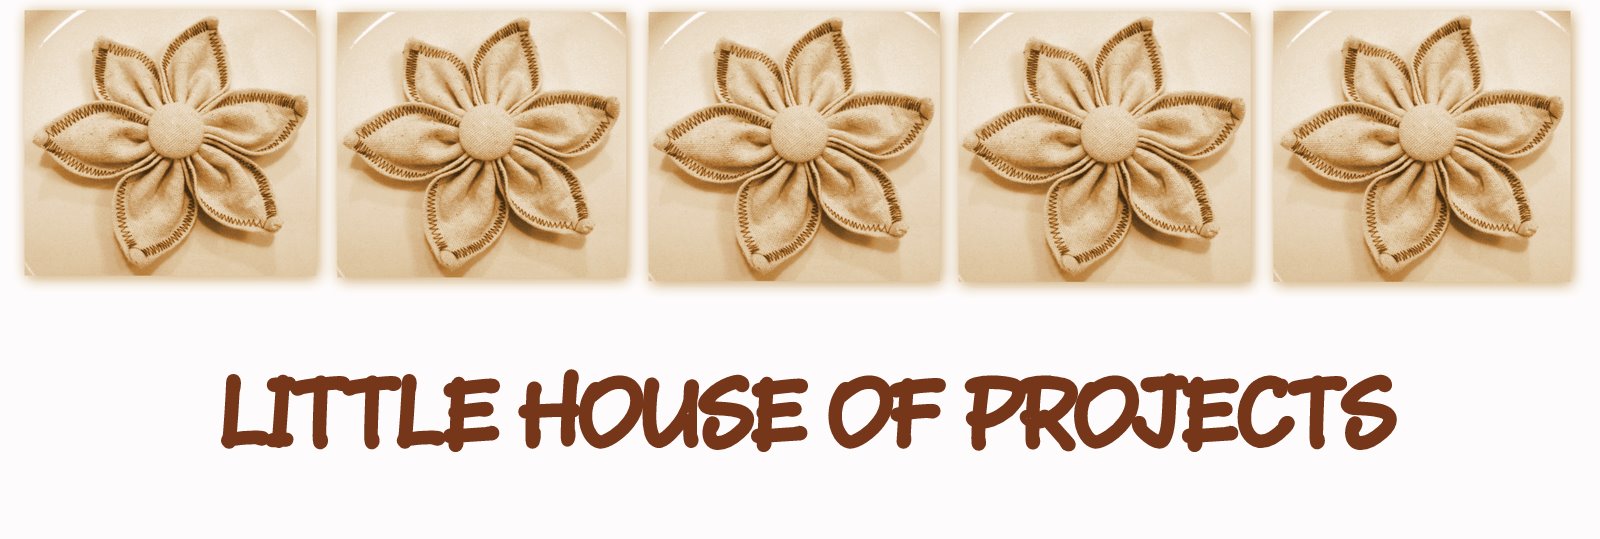 LITTLE HOUSE OF PROJECTS